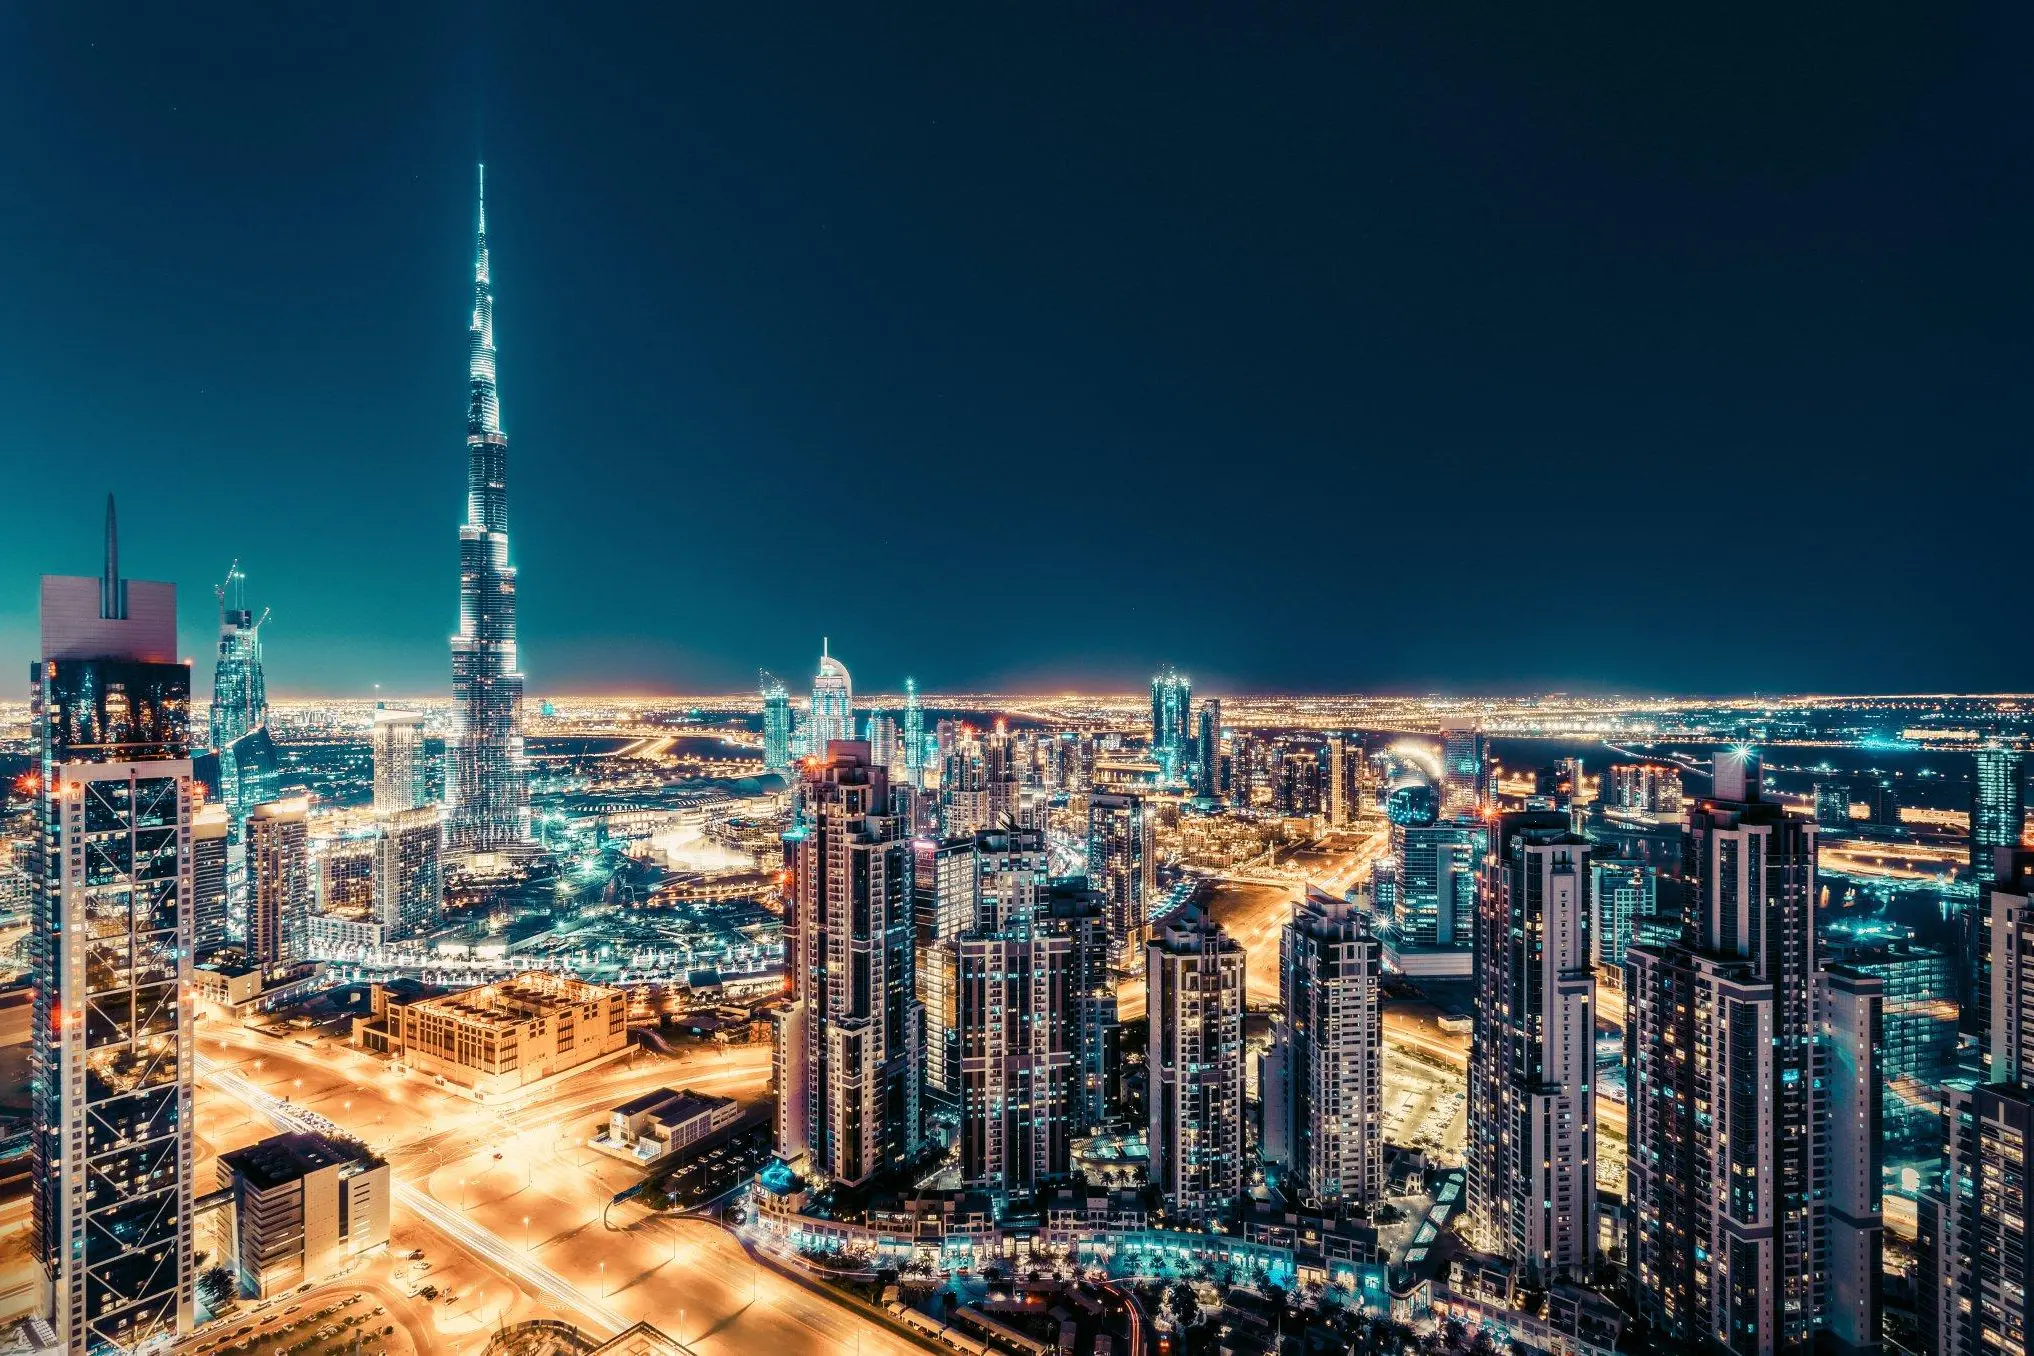 Cityscape Dubai among first major events to return after COVID-19 lockdown